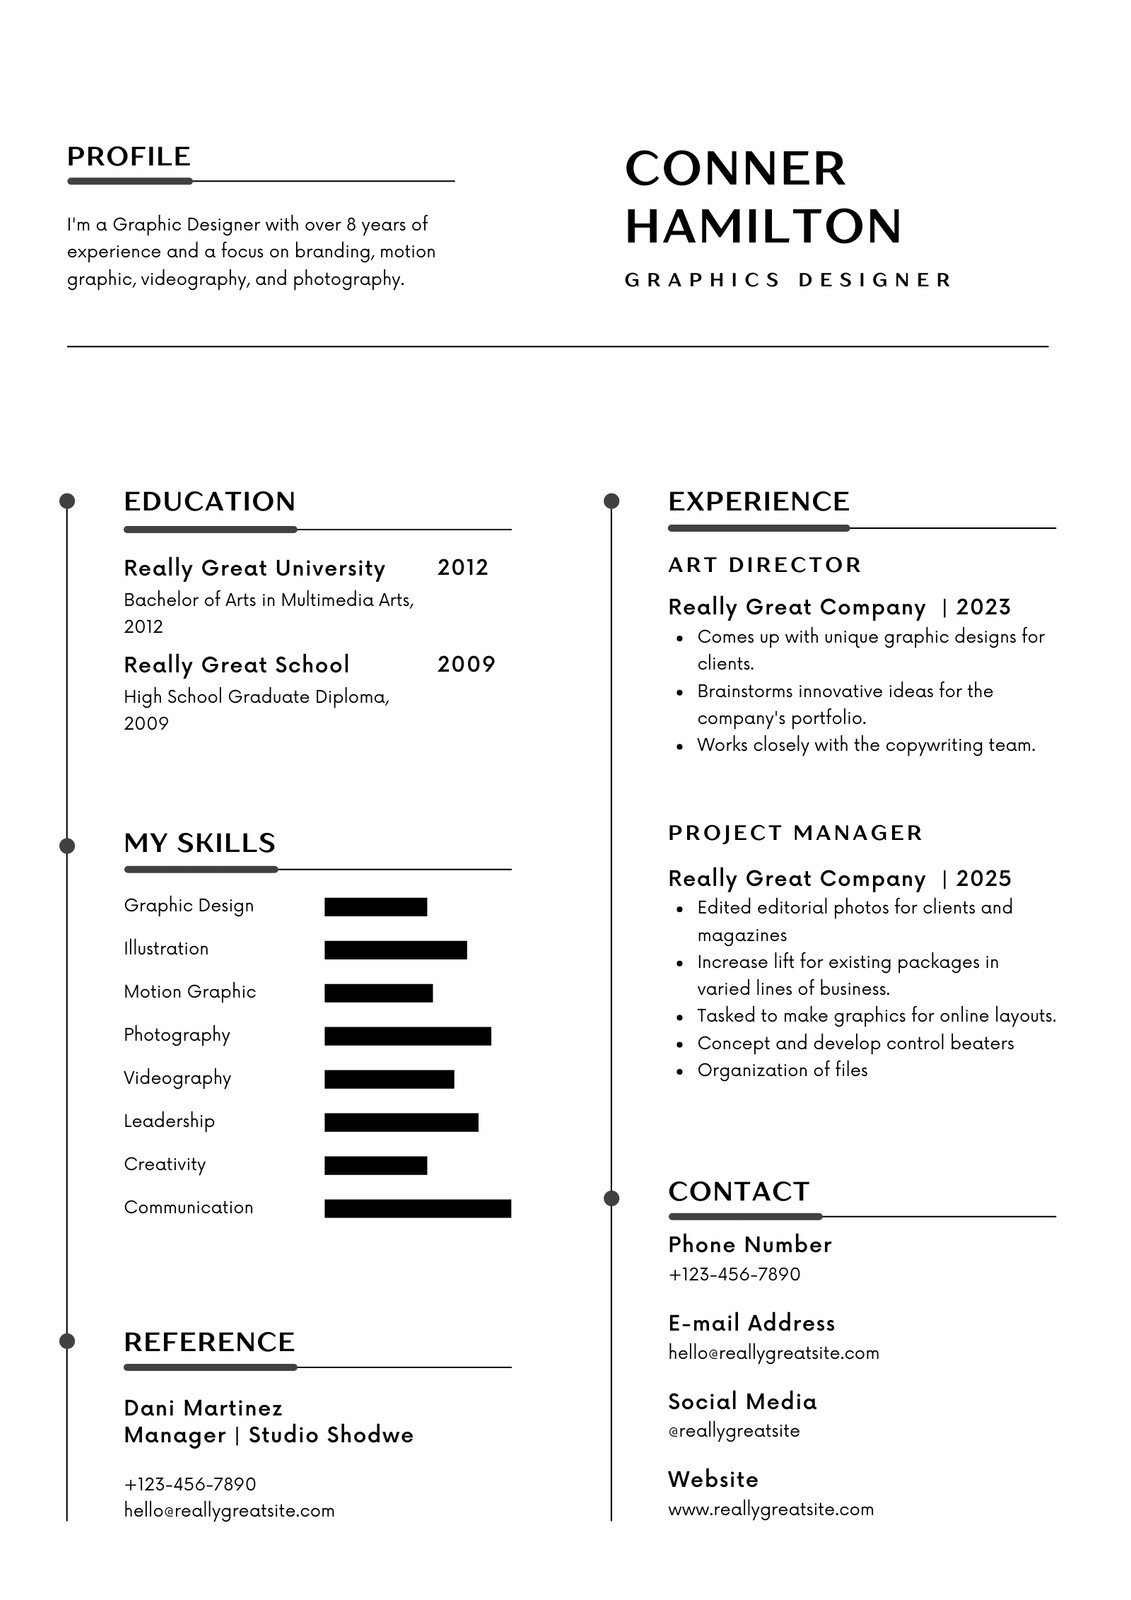 Canva Clean And Minimal Graphic Design Resume Cv Template UmE1ZQE7FLY 